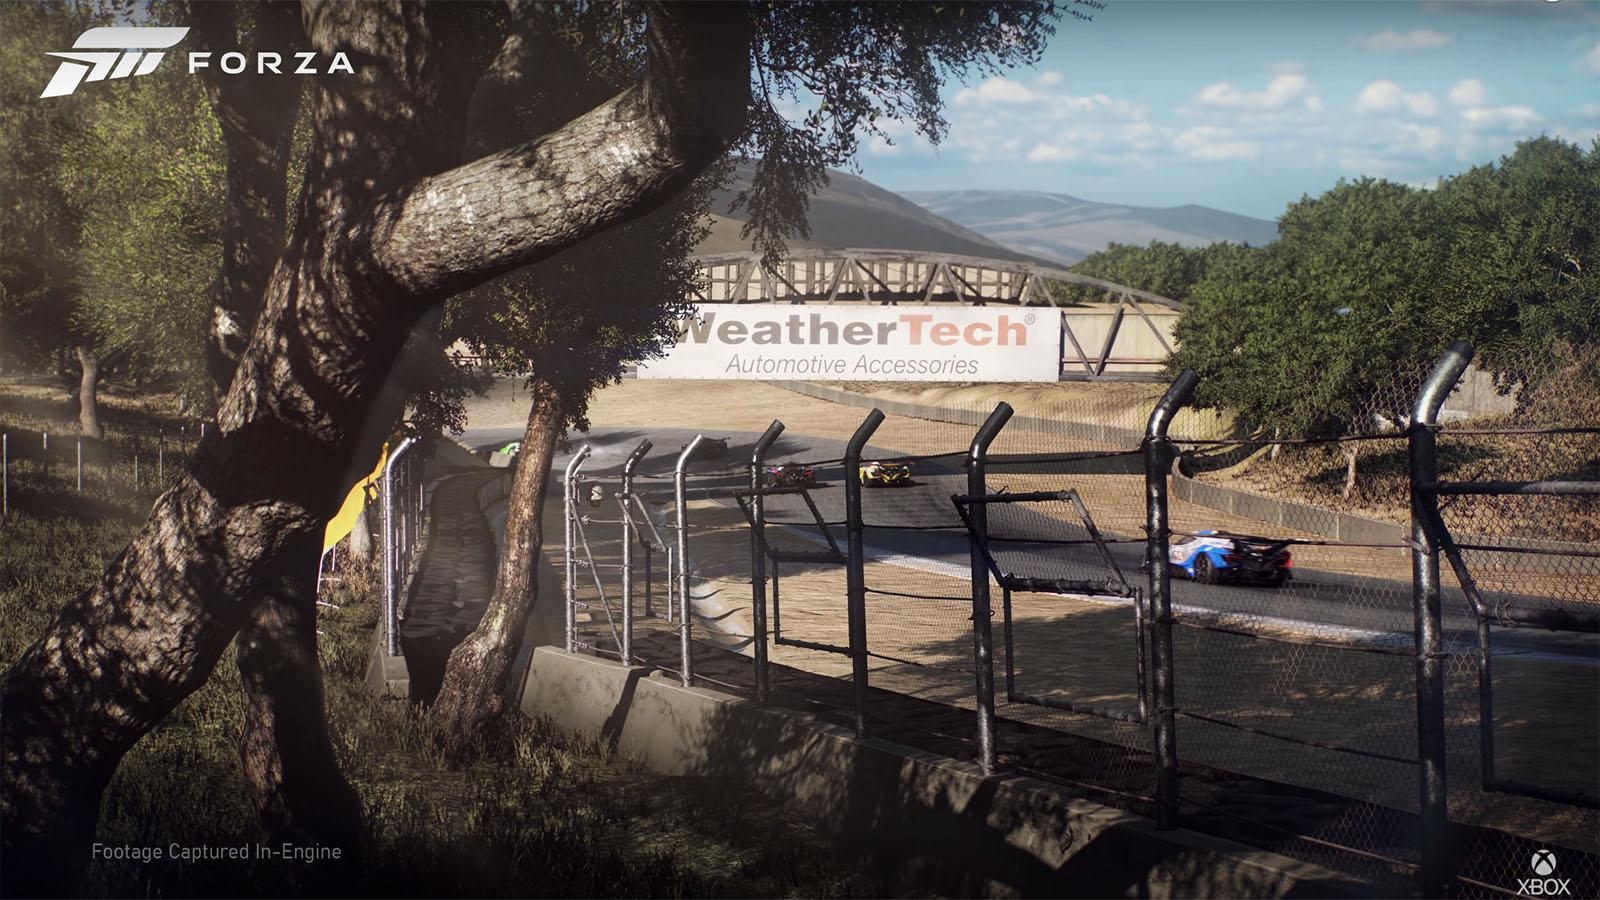 The Laguna Seca circuit has been confirmed for the upcoming game.